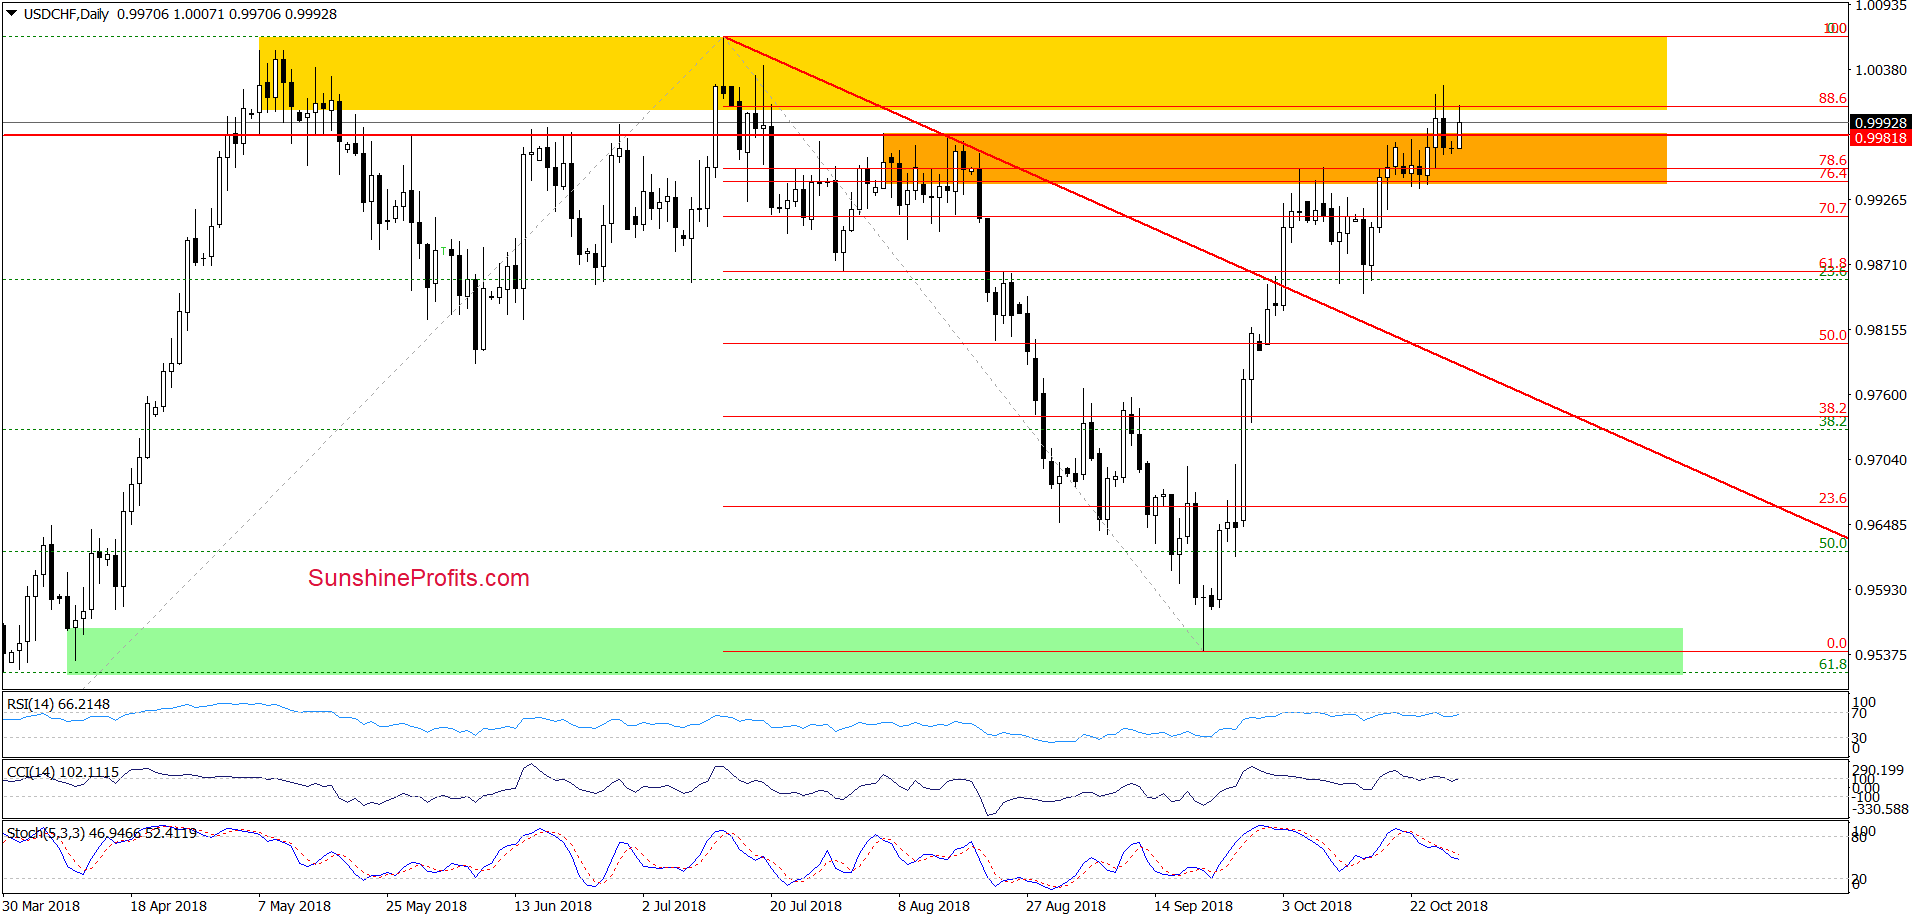  USD/CHF - daily chart